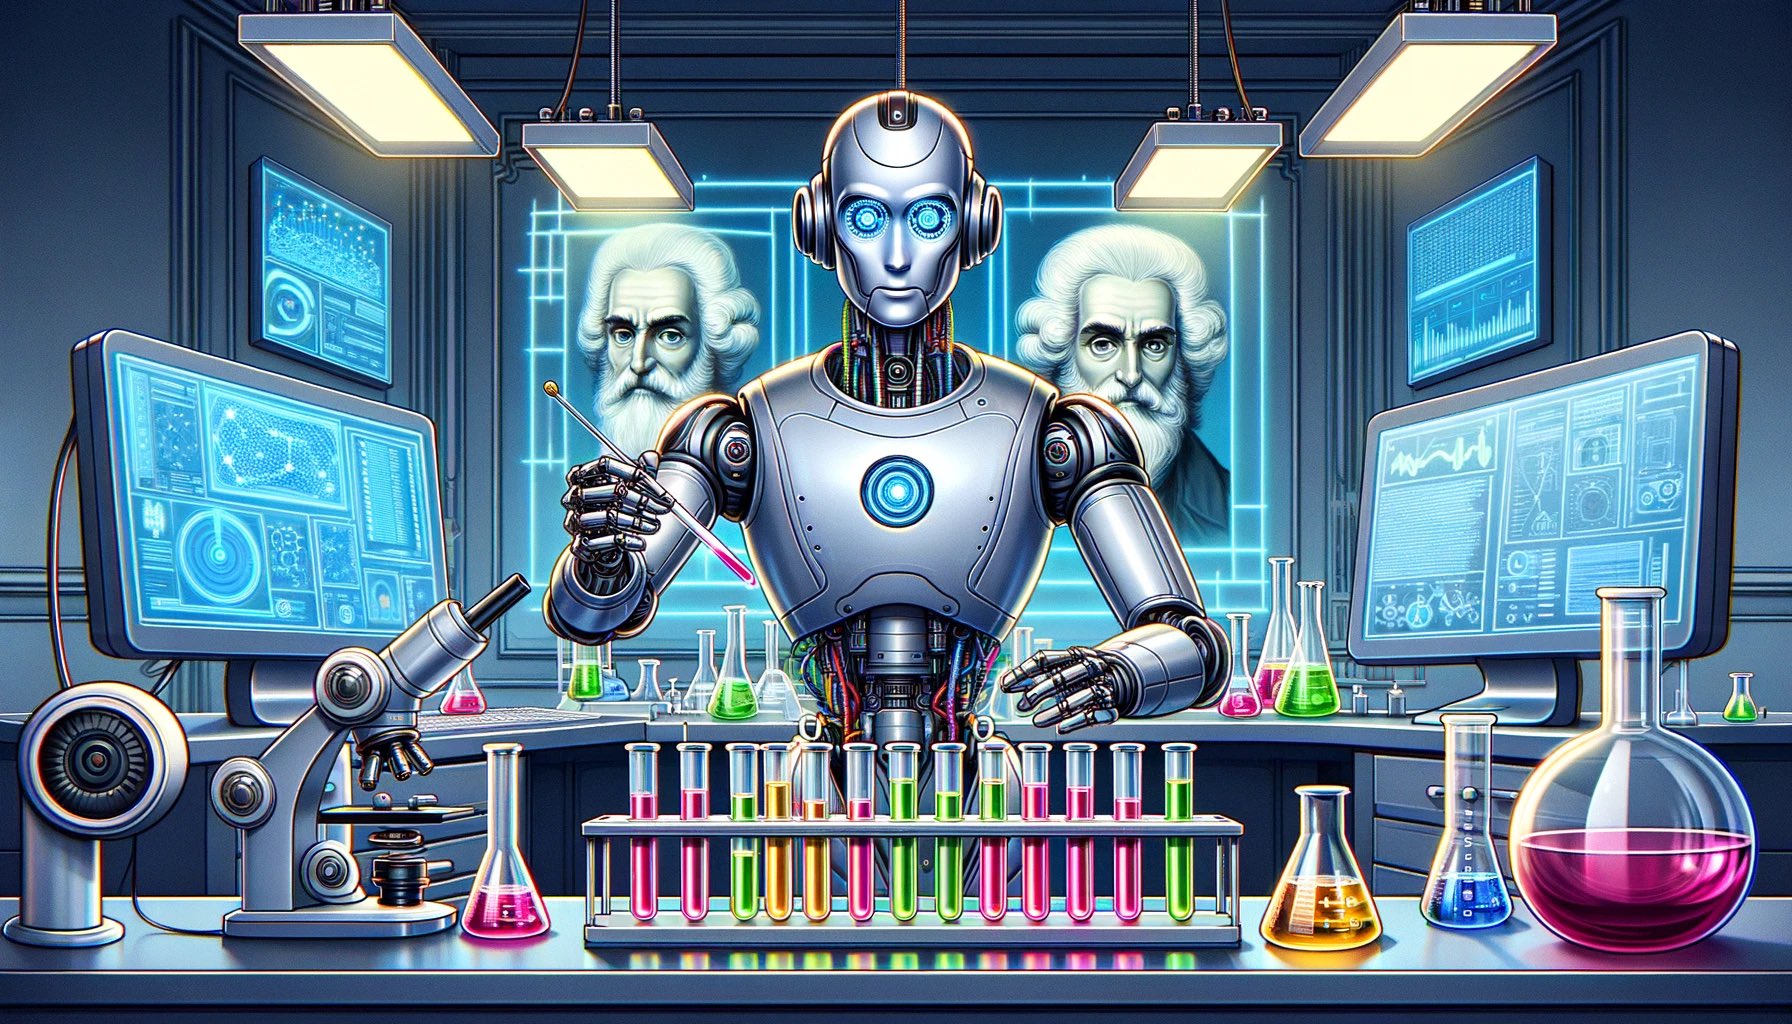 A futuristic robot with blue glowing eyes stands in a high-tech laboratory filled with multicolored chemical solutions in test tubes and beakers. The robot is meticulously working with a pipette. Behind the robot, there are two identical holographic displays showing the face of an elderly man with a white beard, reminiscent of a historical figure. Surrounding the robot are advanced computer monitors displaying various scientific data and diagrams. The ambiance of the room is dominated by neon blue lighting.